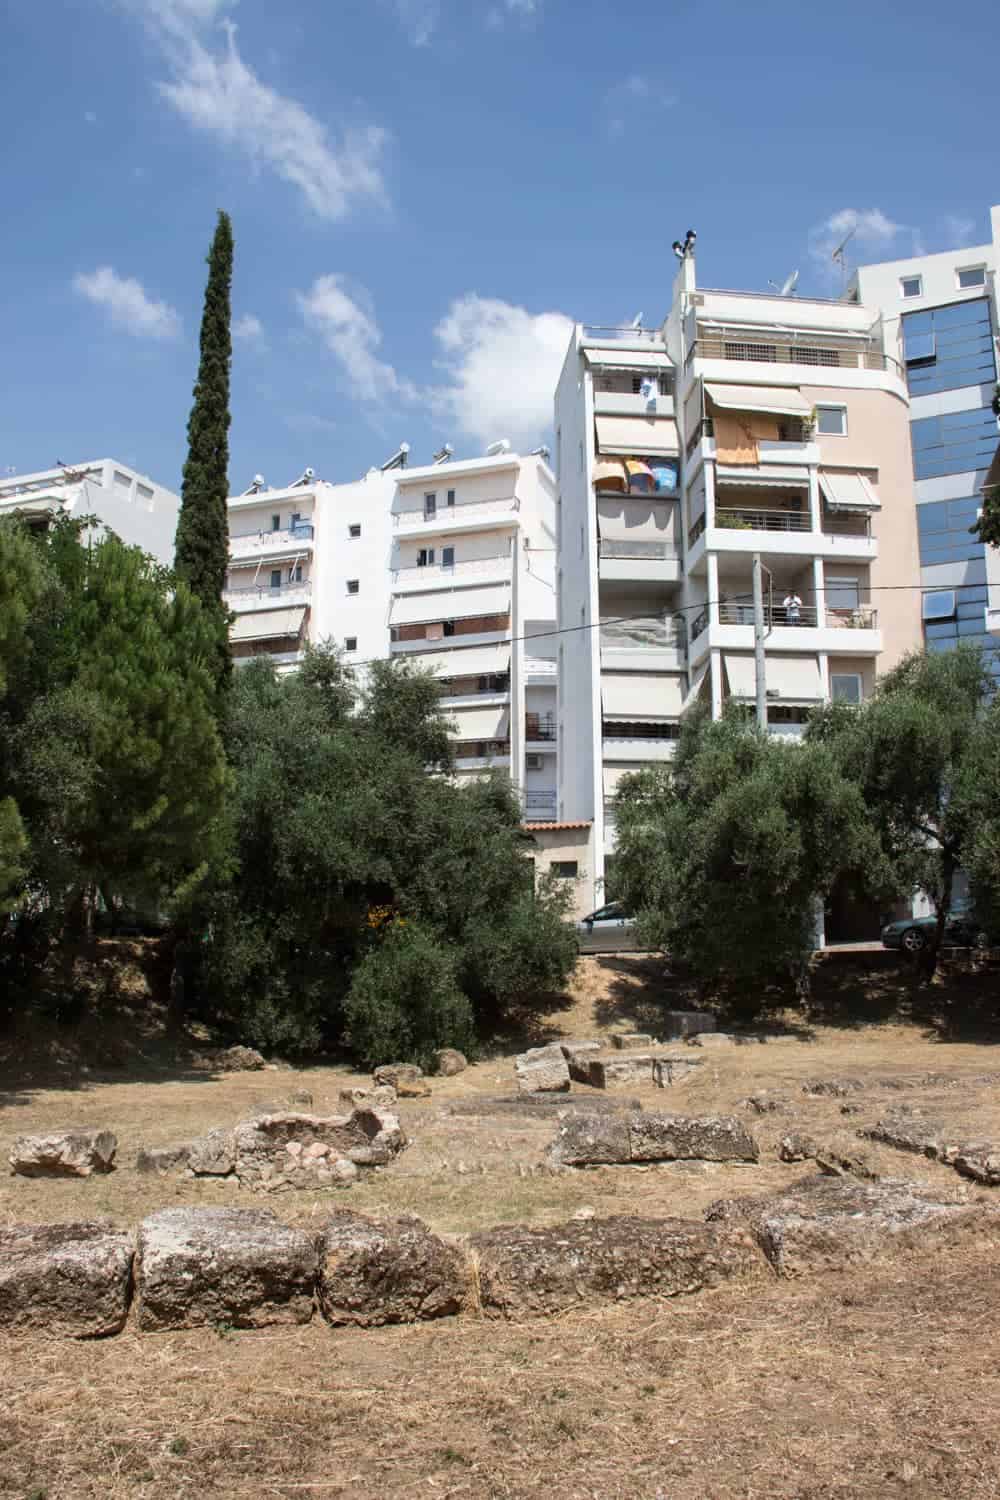 A white modern apartment building looms behind a tree-lined field full of stone ruins - part of Plato's Academy in Athens. walking tour